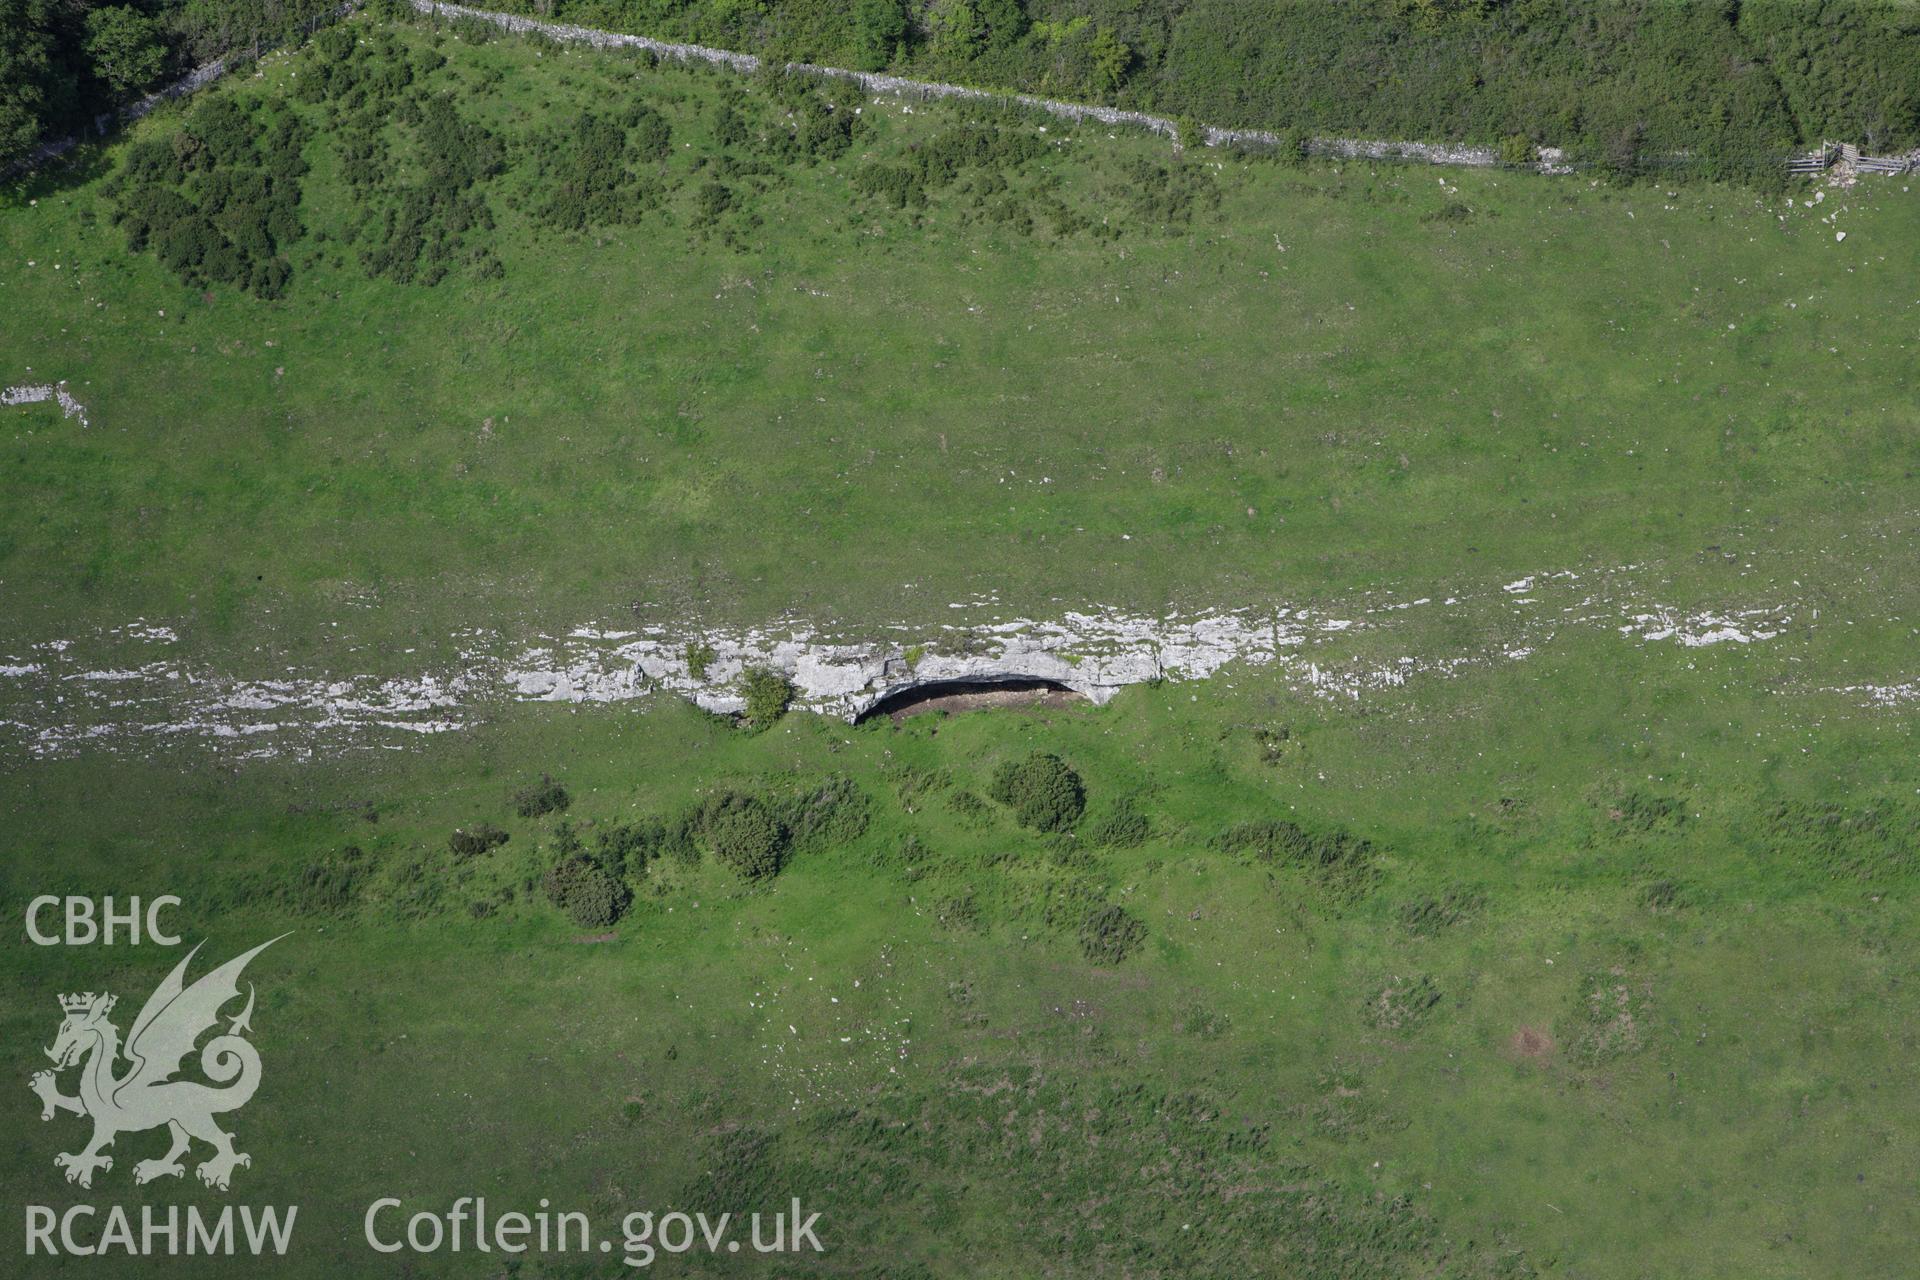 RCAHMW colour oblique aerial photograph of Gop Cave. Taken on 30 July 2009 by Toby Driver